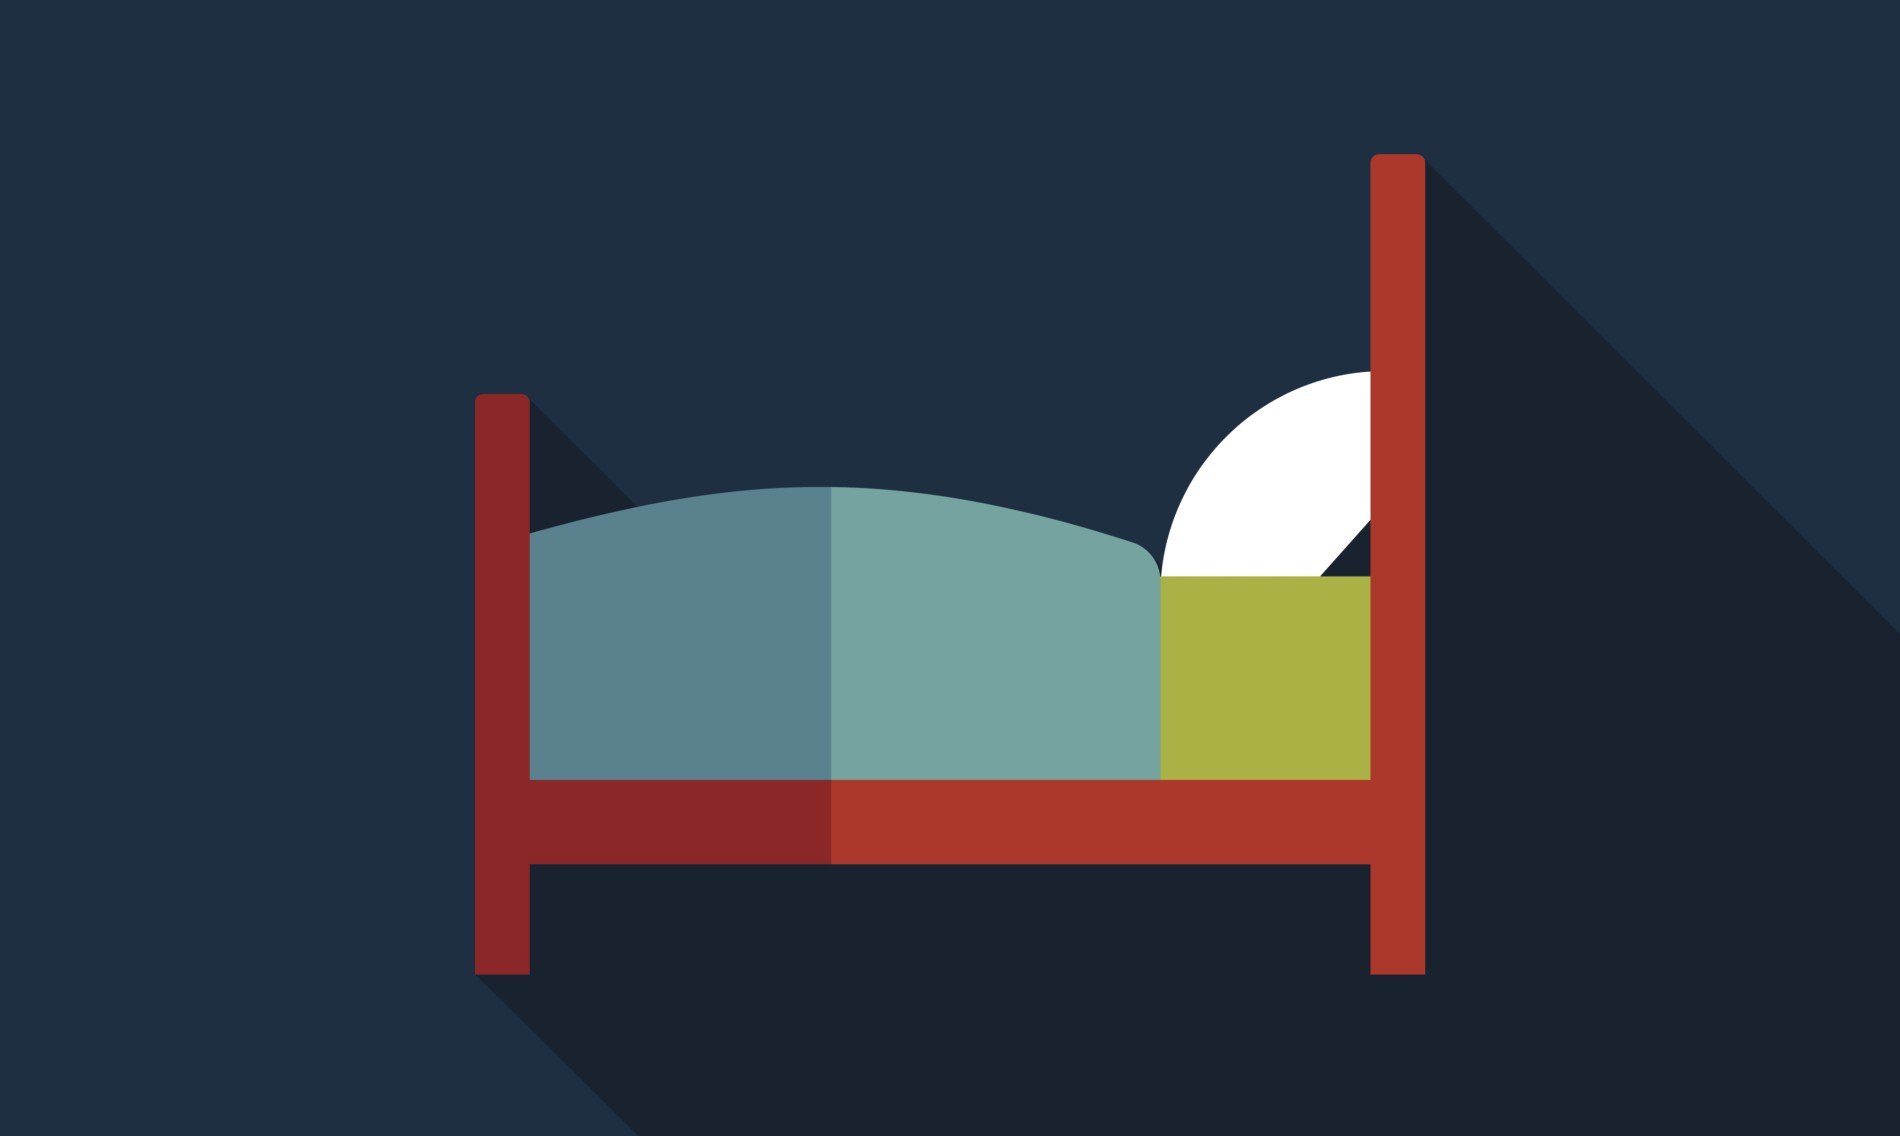 Illustration of a bed casting a shadow across a dark background